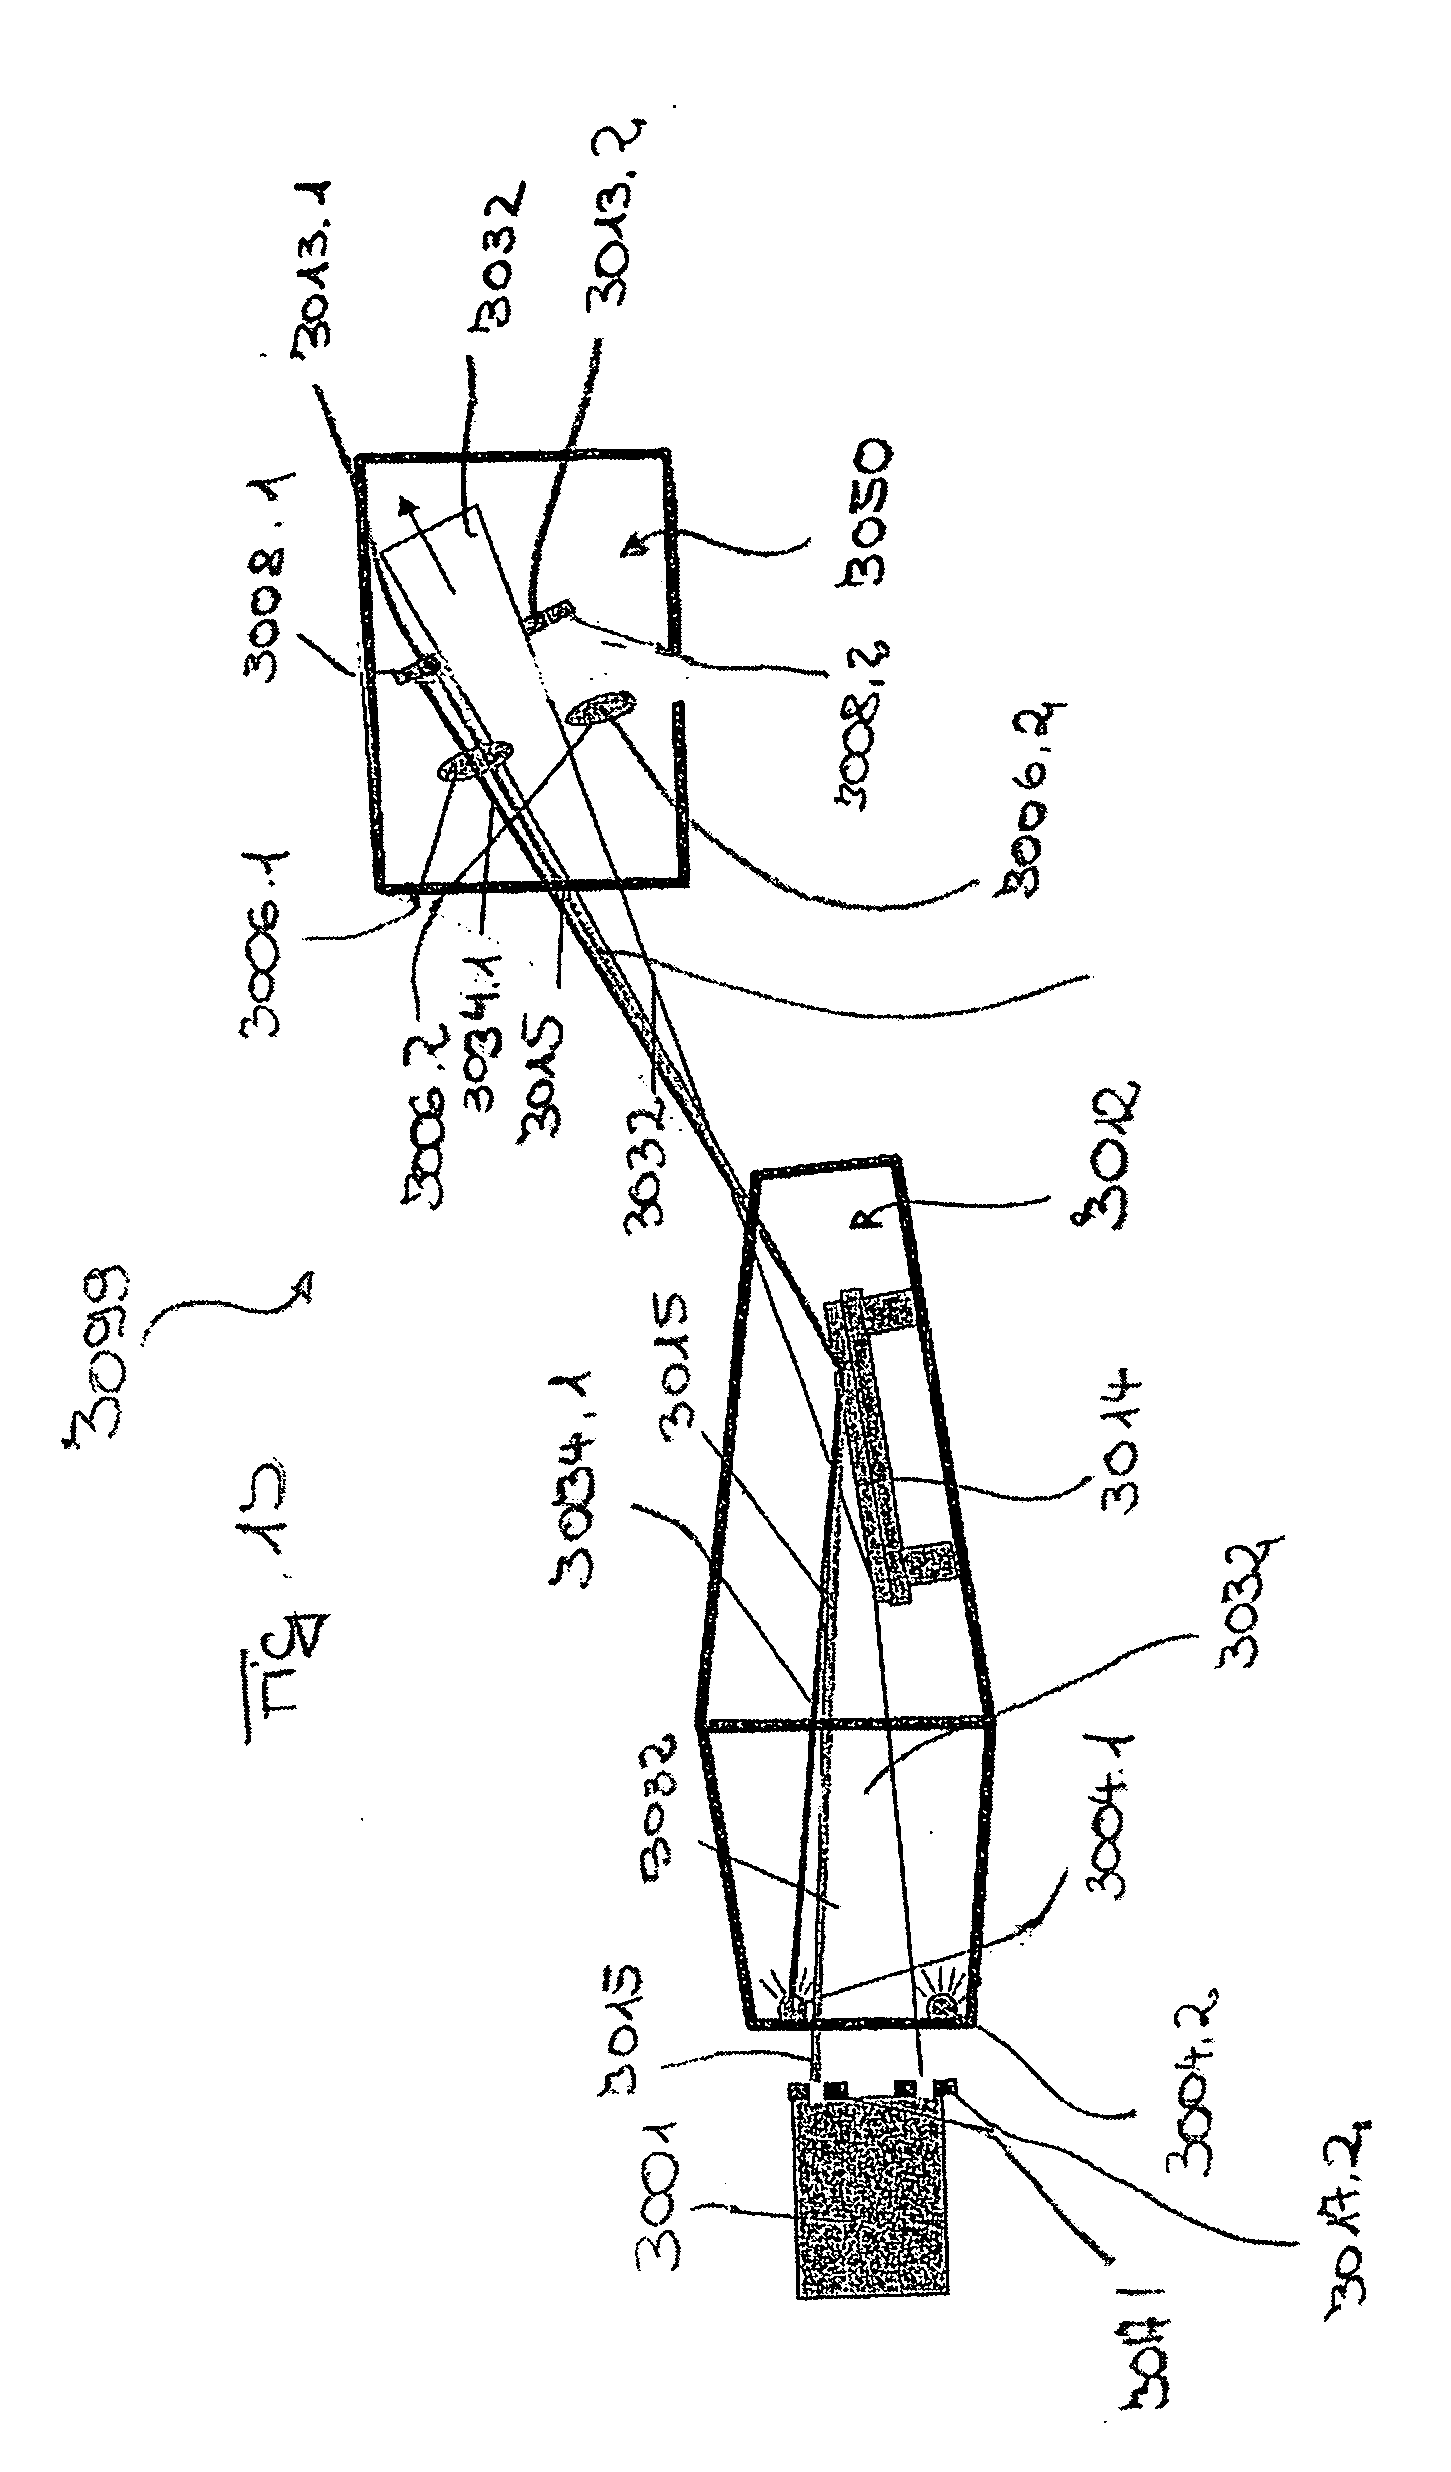 Illumination system for a wavelength of less than or equal to 193 nm, with sensors for determining an illumination